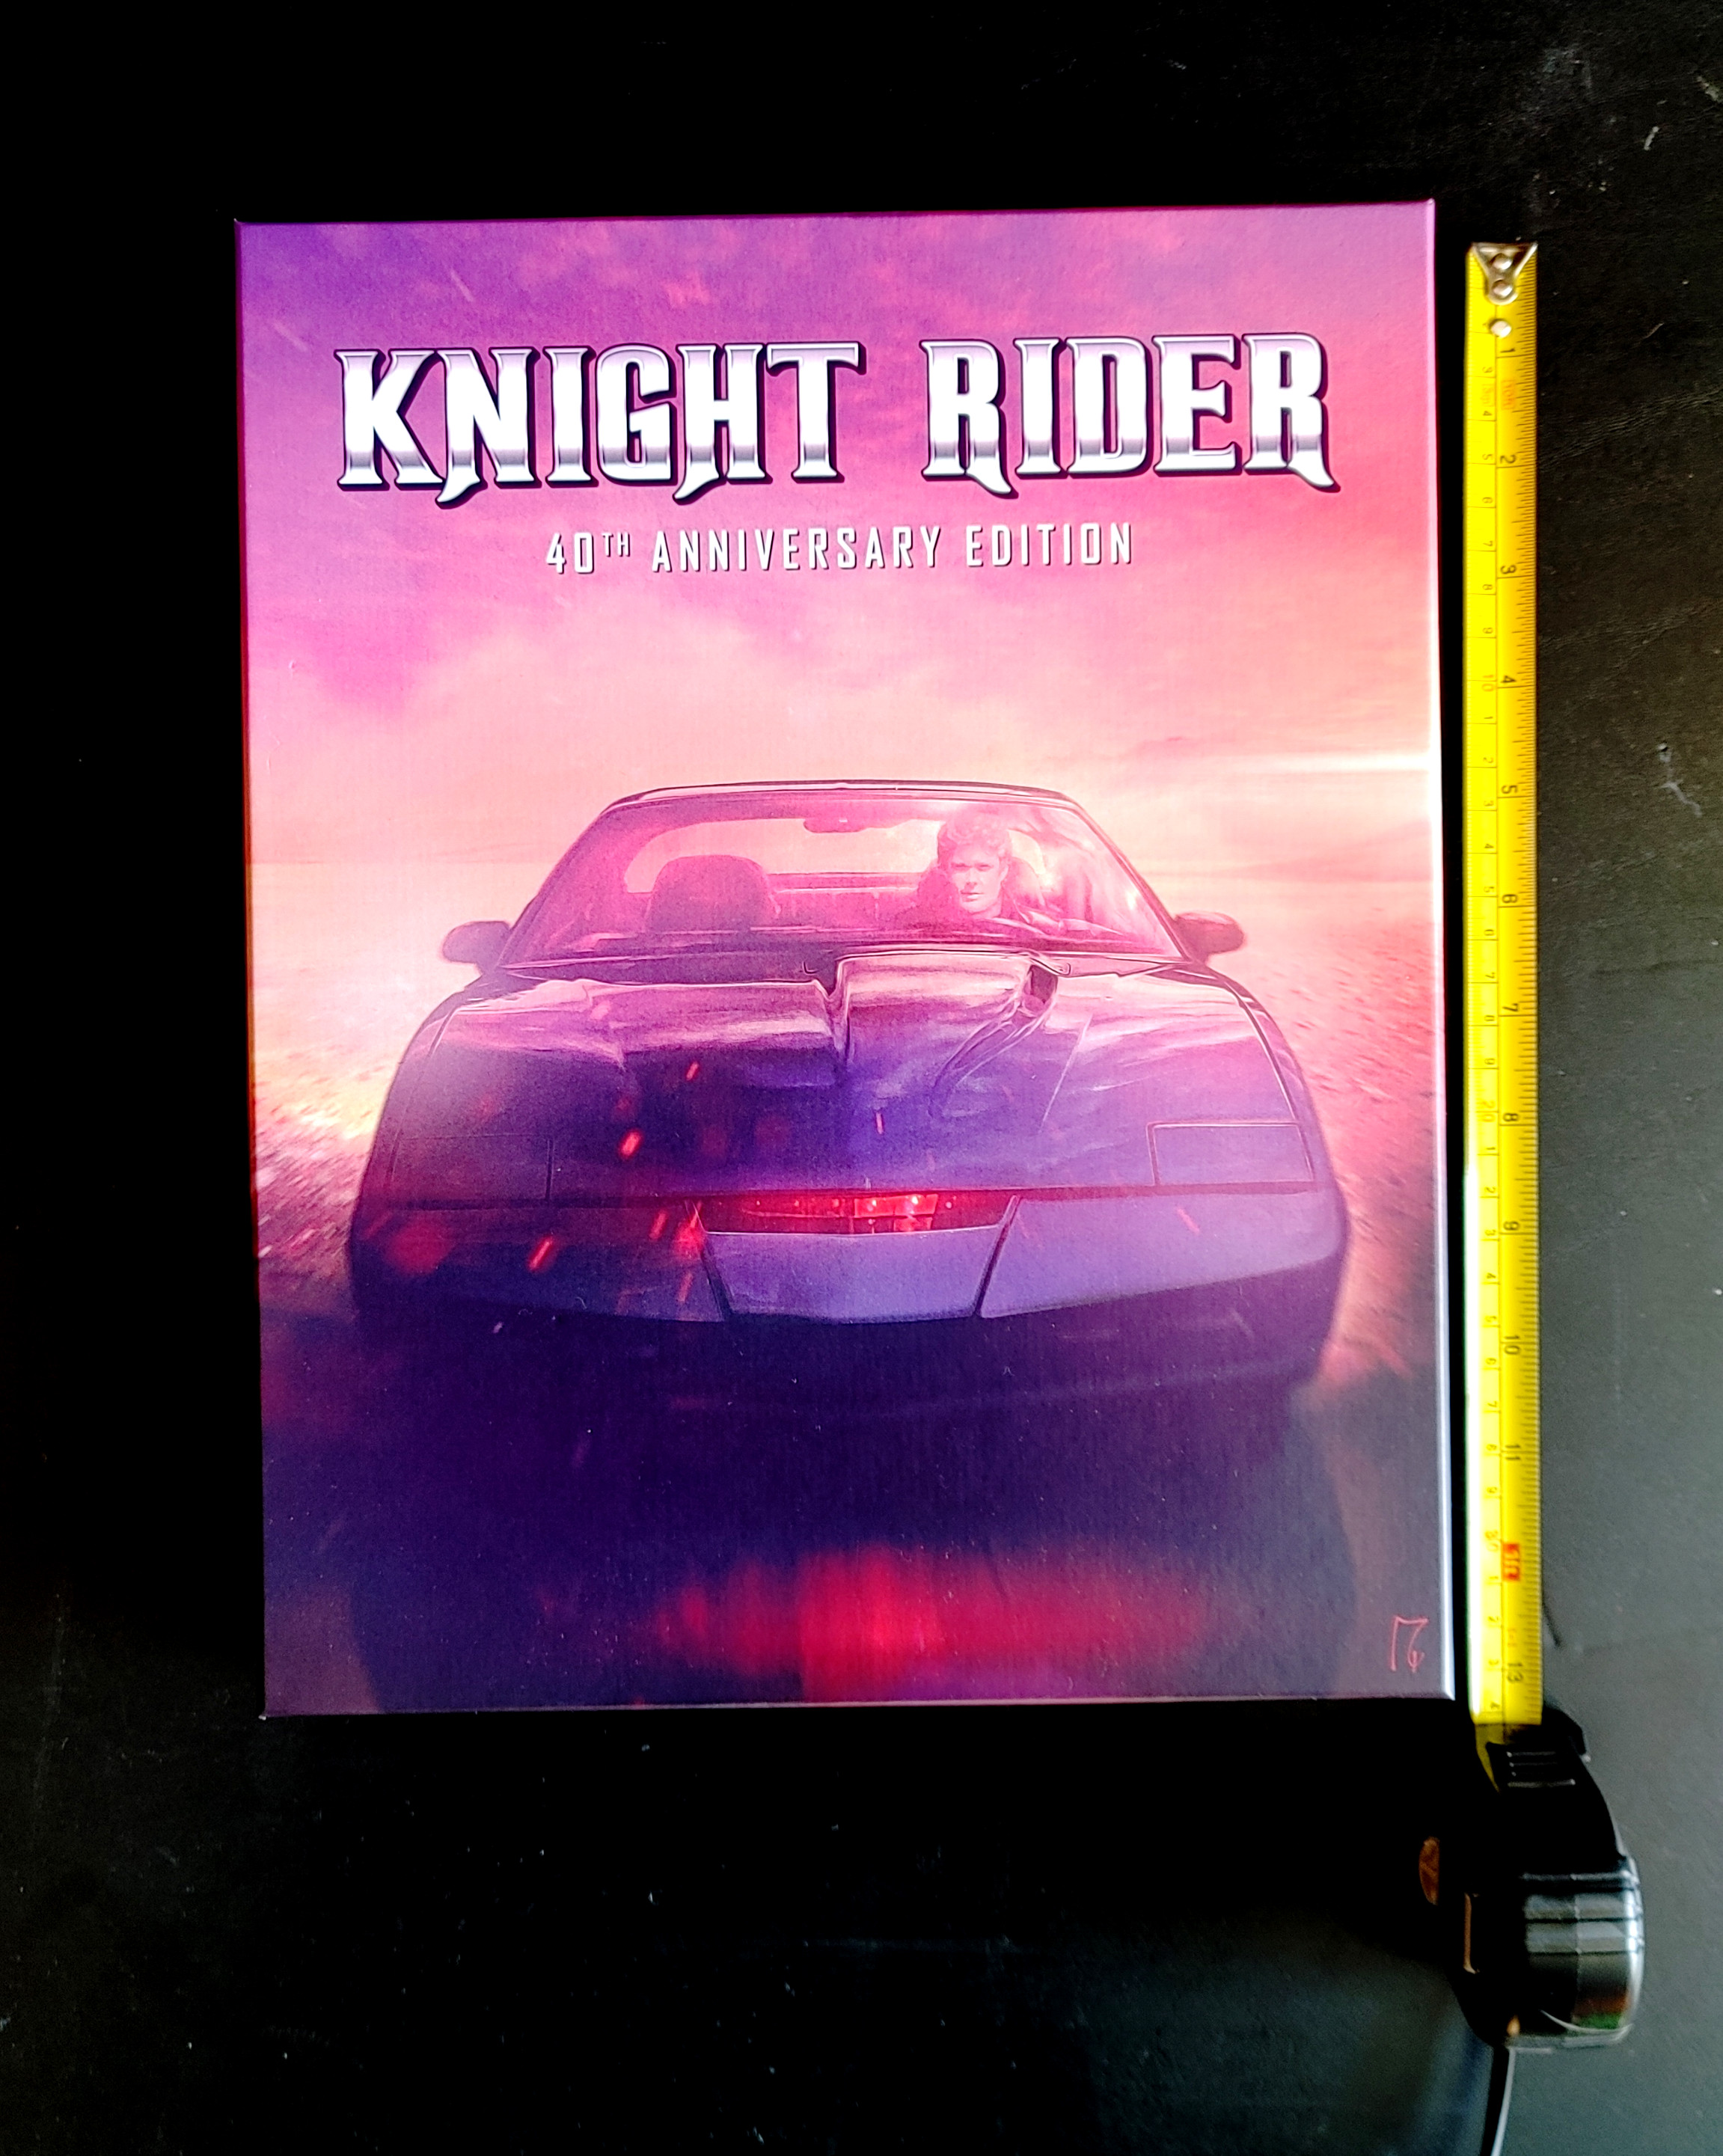  KNIGHT RIDER COMPLETE DVD : Edward Mulhare